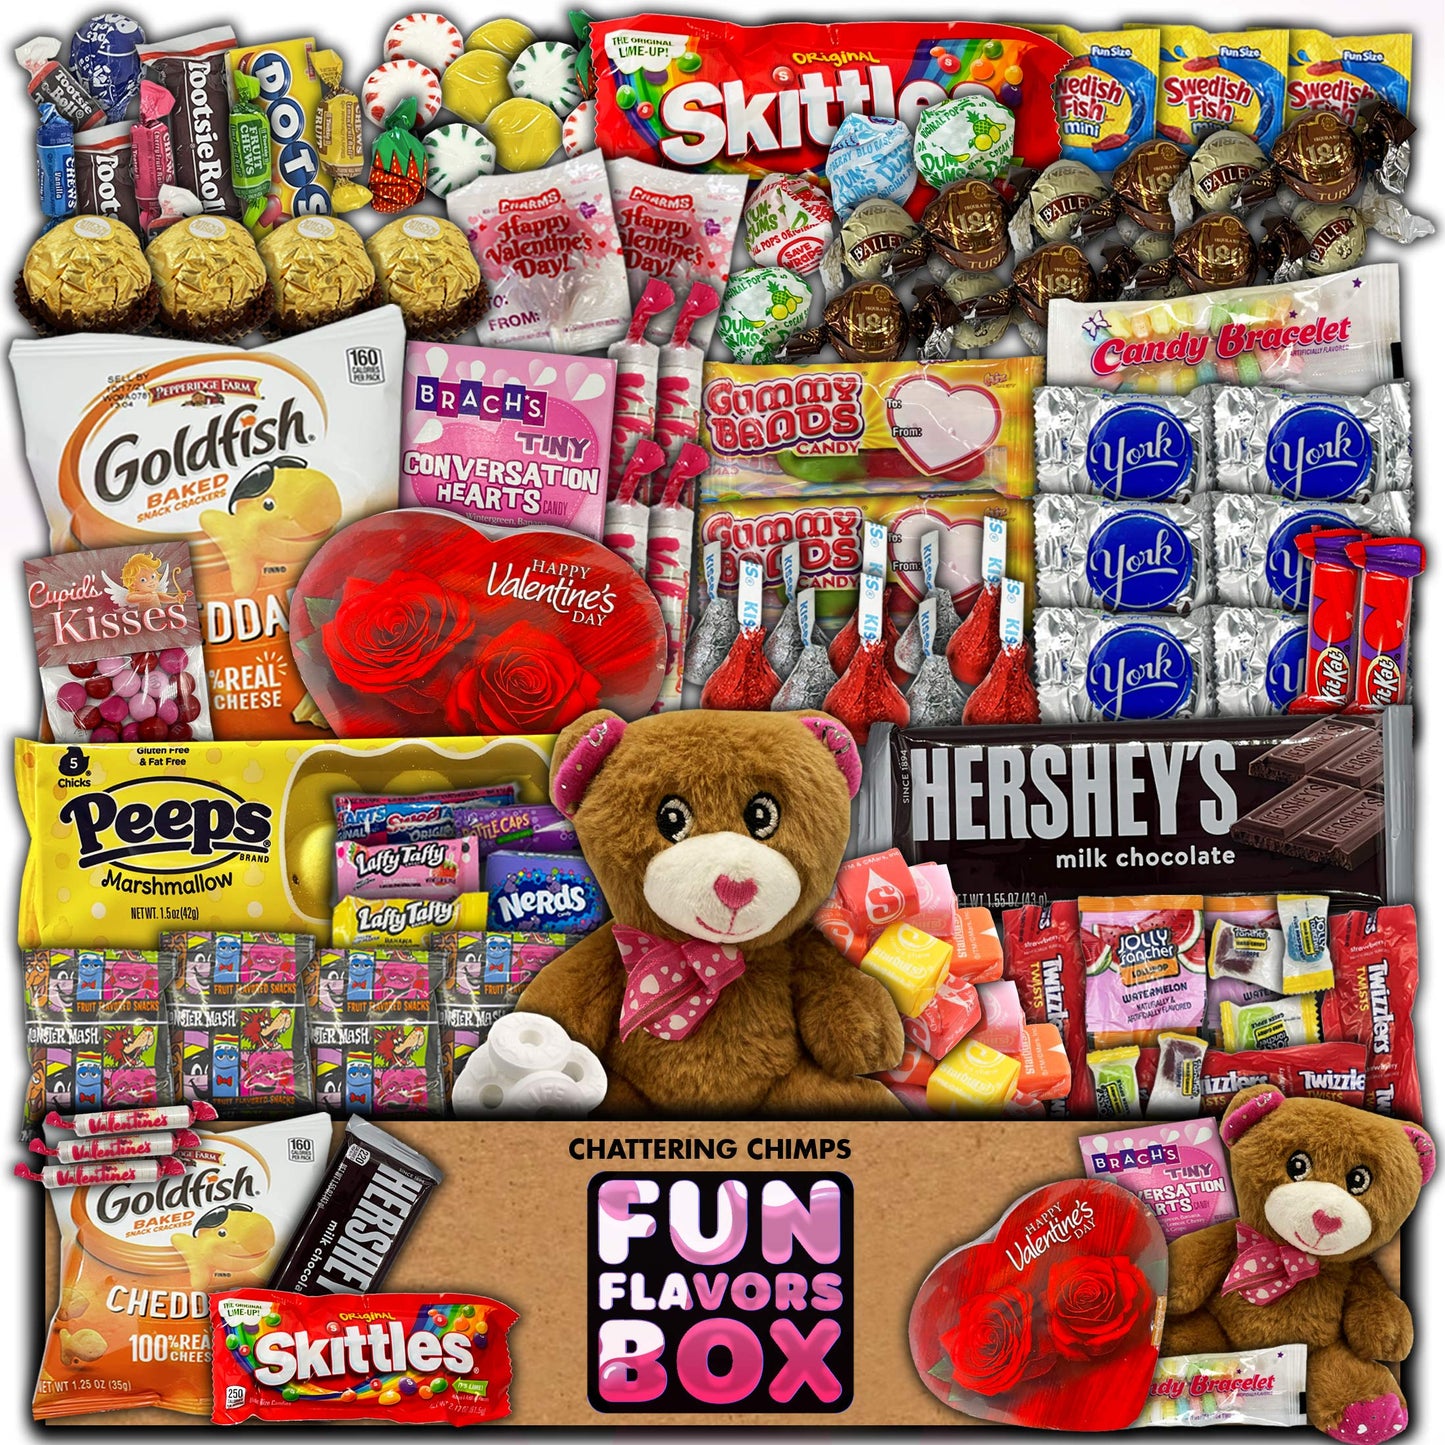 Valentine's Day Candy Snack Gift Box Valentines 110 Count Variety Care Package